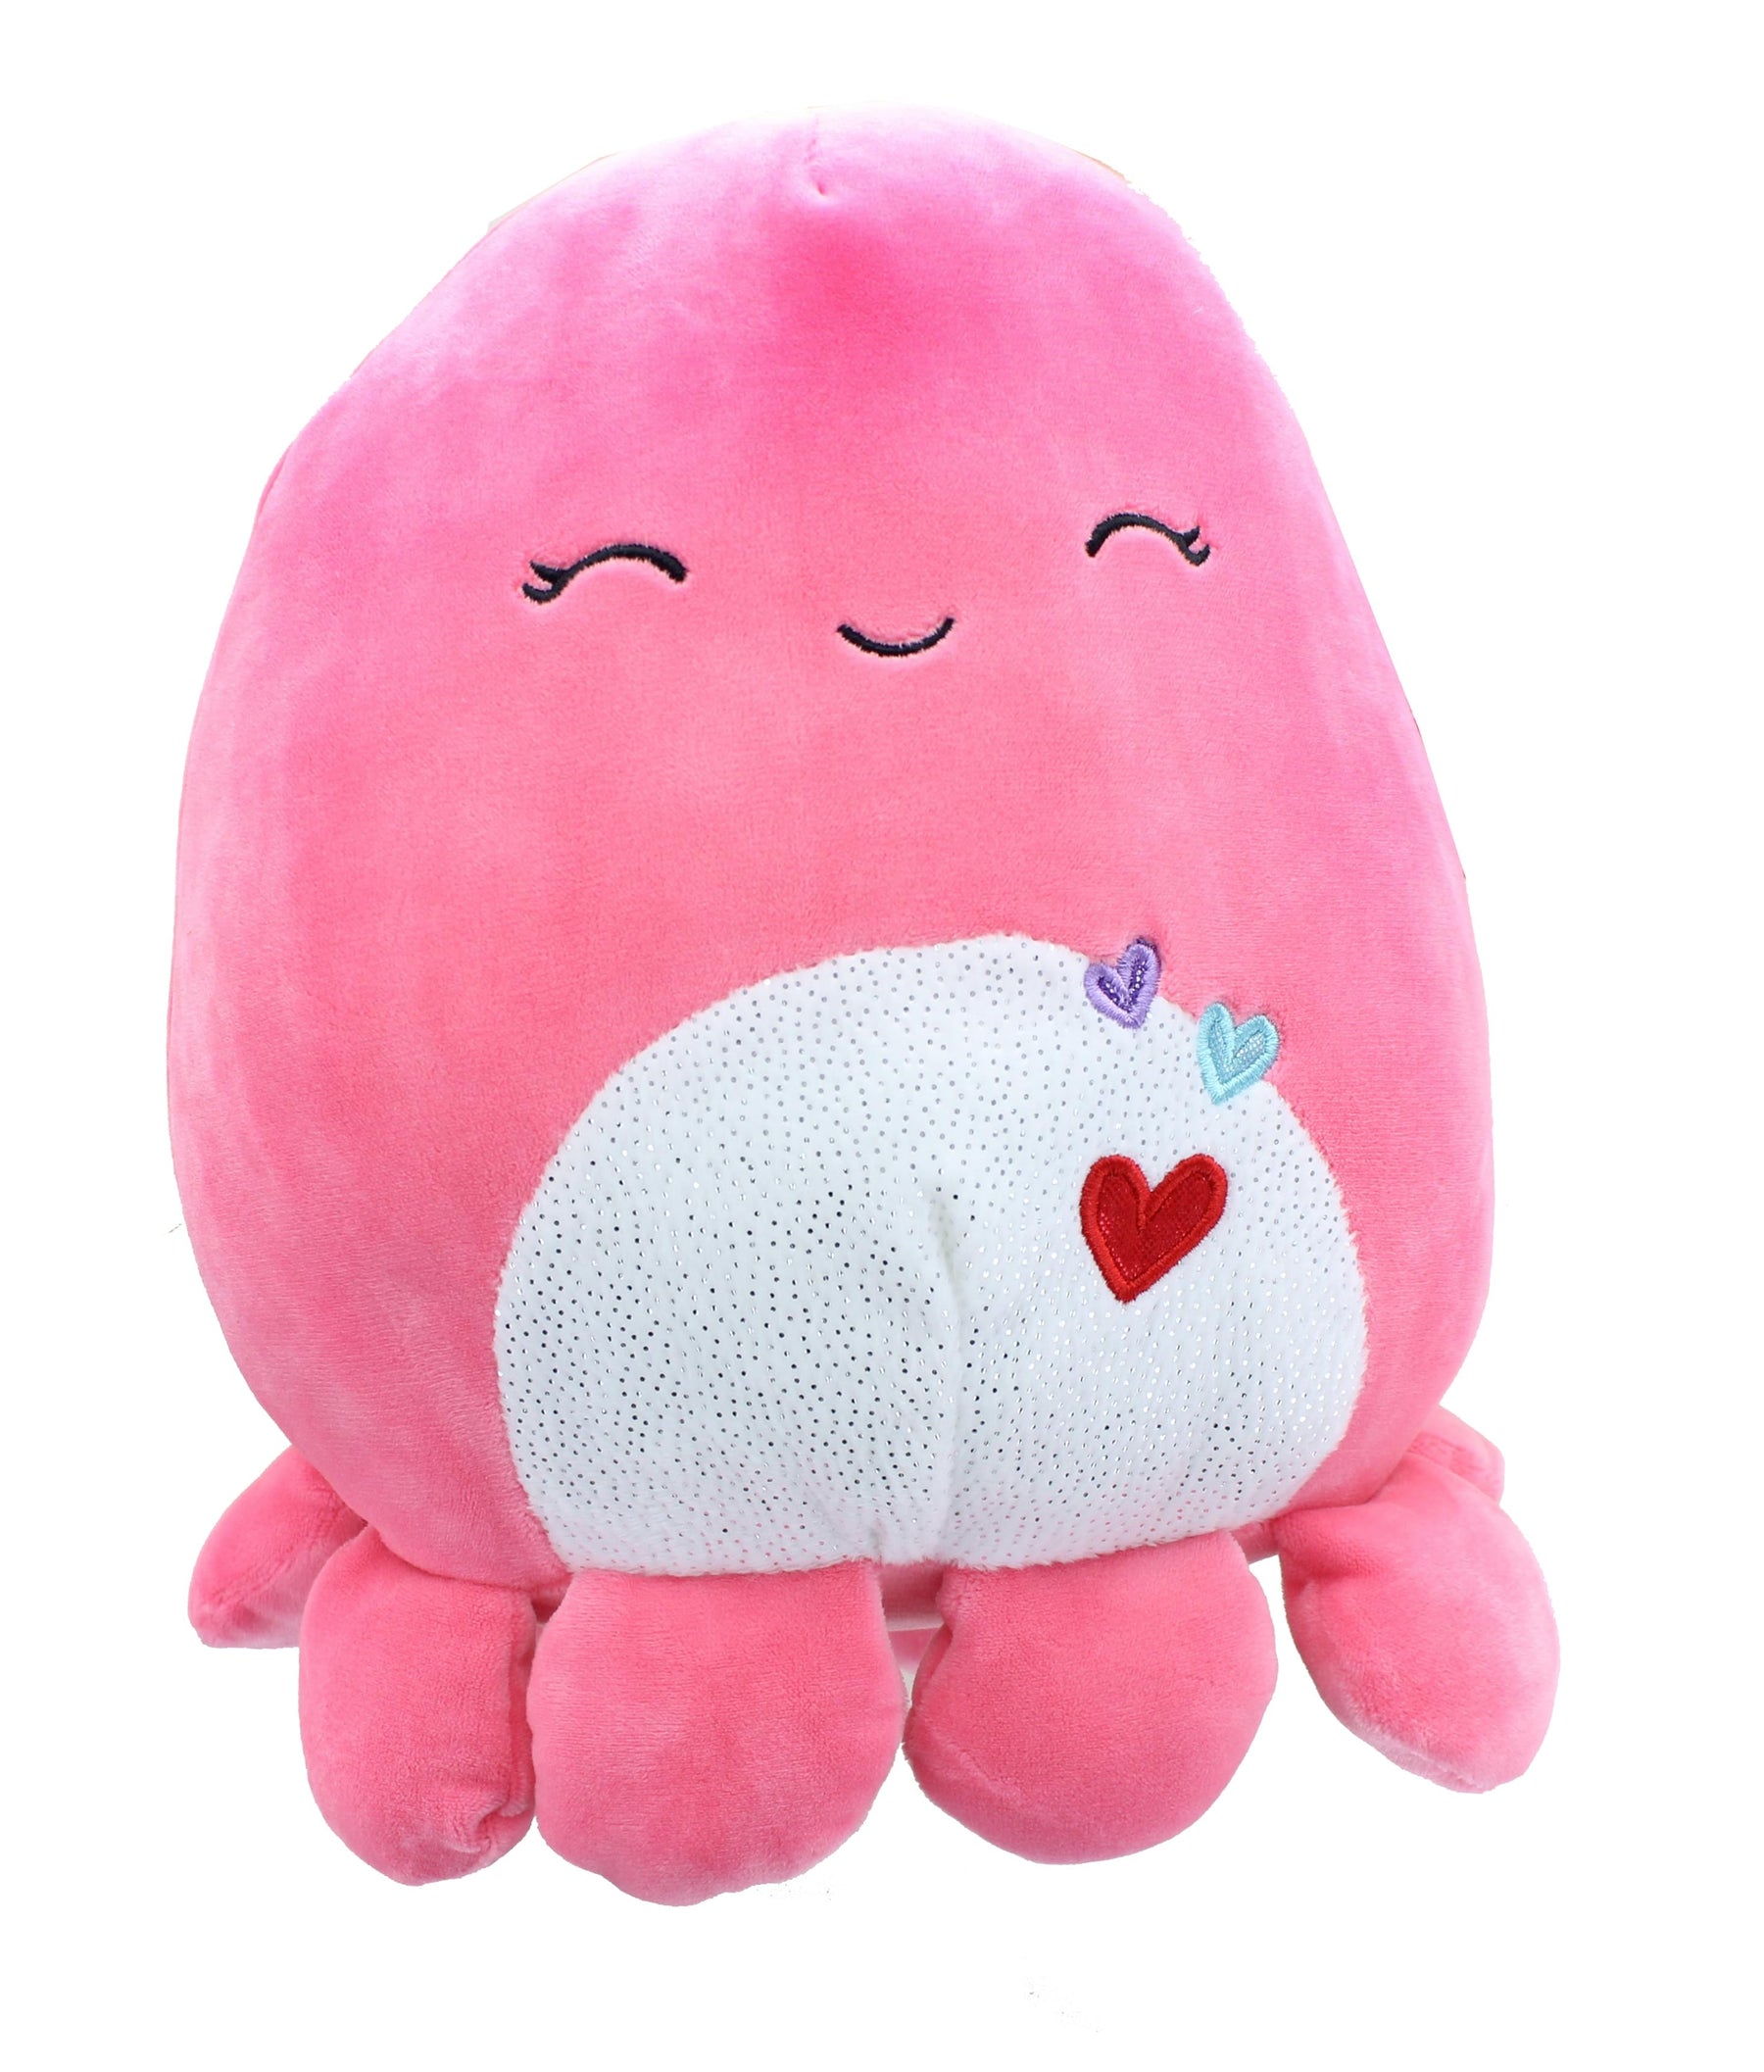 Squishmallow 12 Inch Valentine's Day Plush | Abby the Pink Octopus